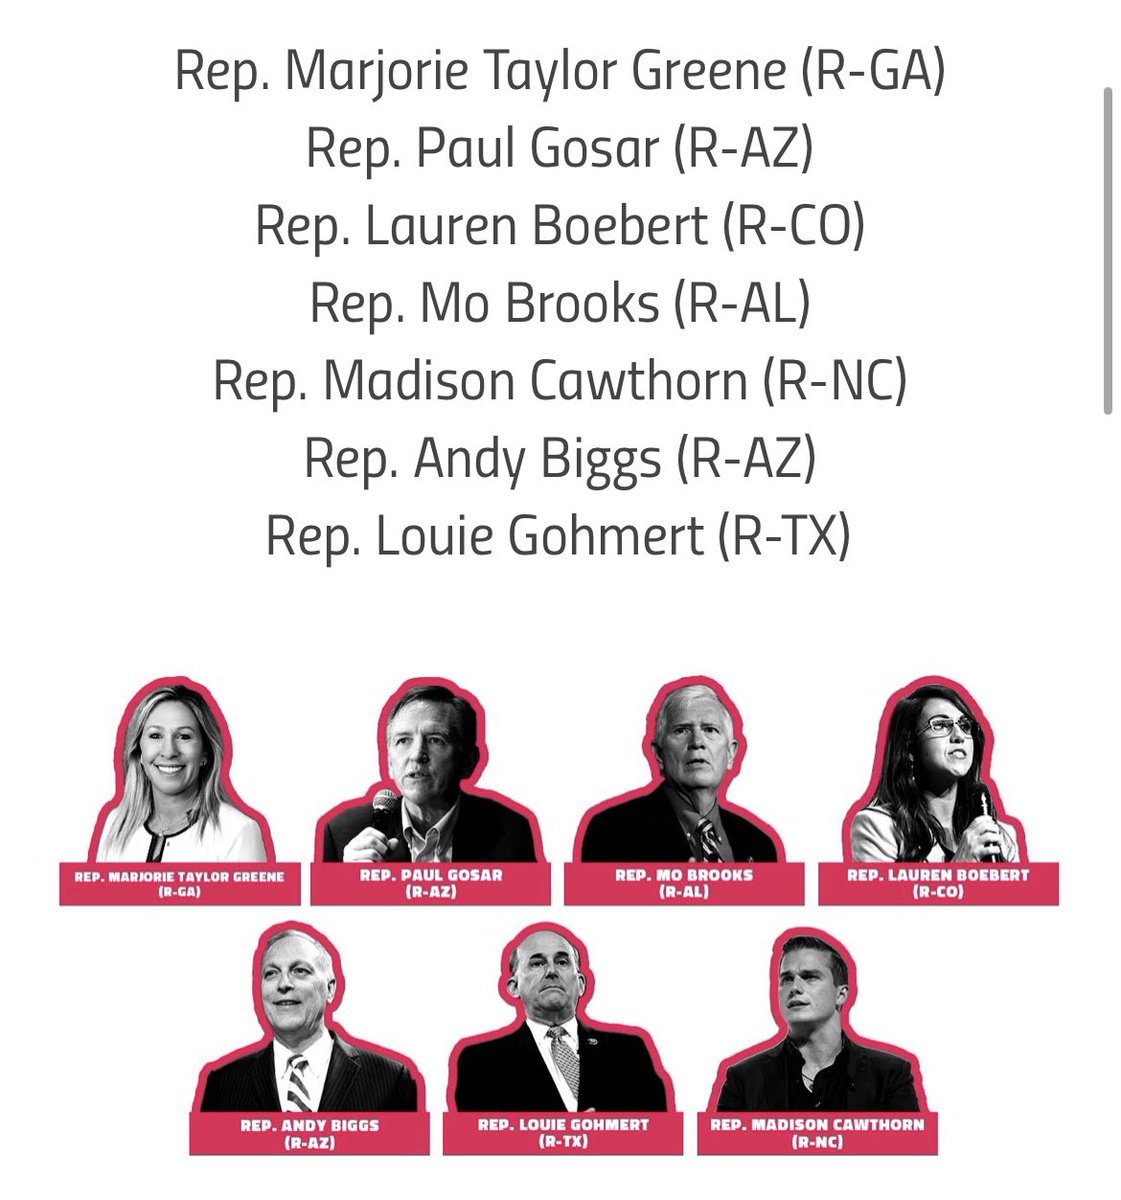 I hope the Feds are closely monitoring the Republican Reps who helped plan the #Jan6thInsurrection-#MarjorieTaylorGreene (GA) #LaurenBoebert (CO) #PaulGosar (AZ) #AndyBiggs (AZ). They are not to be trusted. Luckily, Mo Brooks, Madison Cawthorn, & Louie Gohmert are no longer Reps